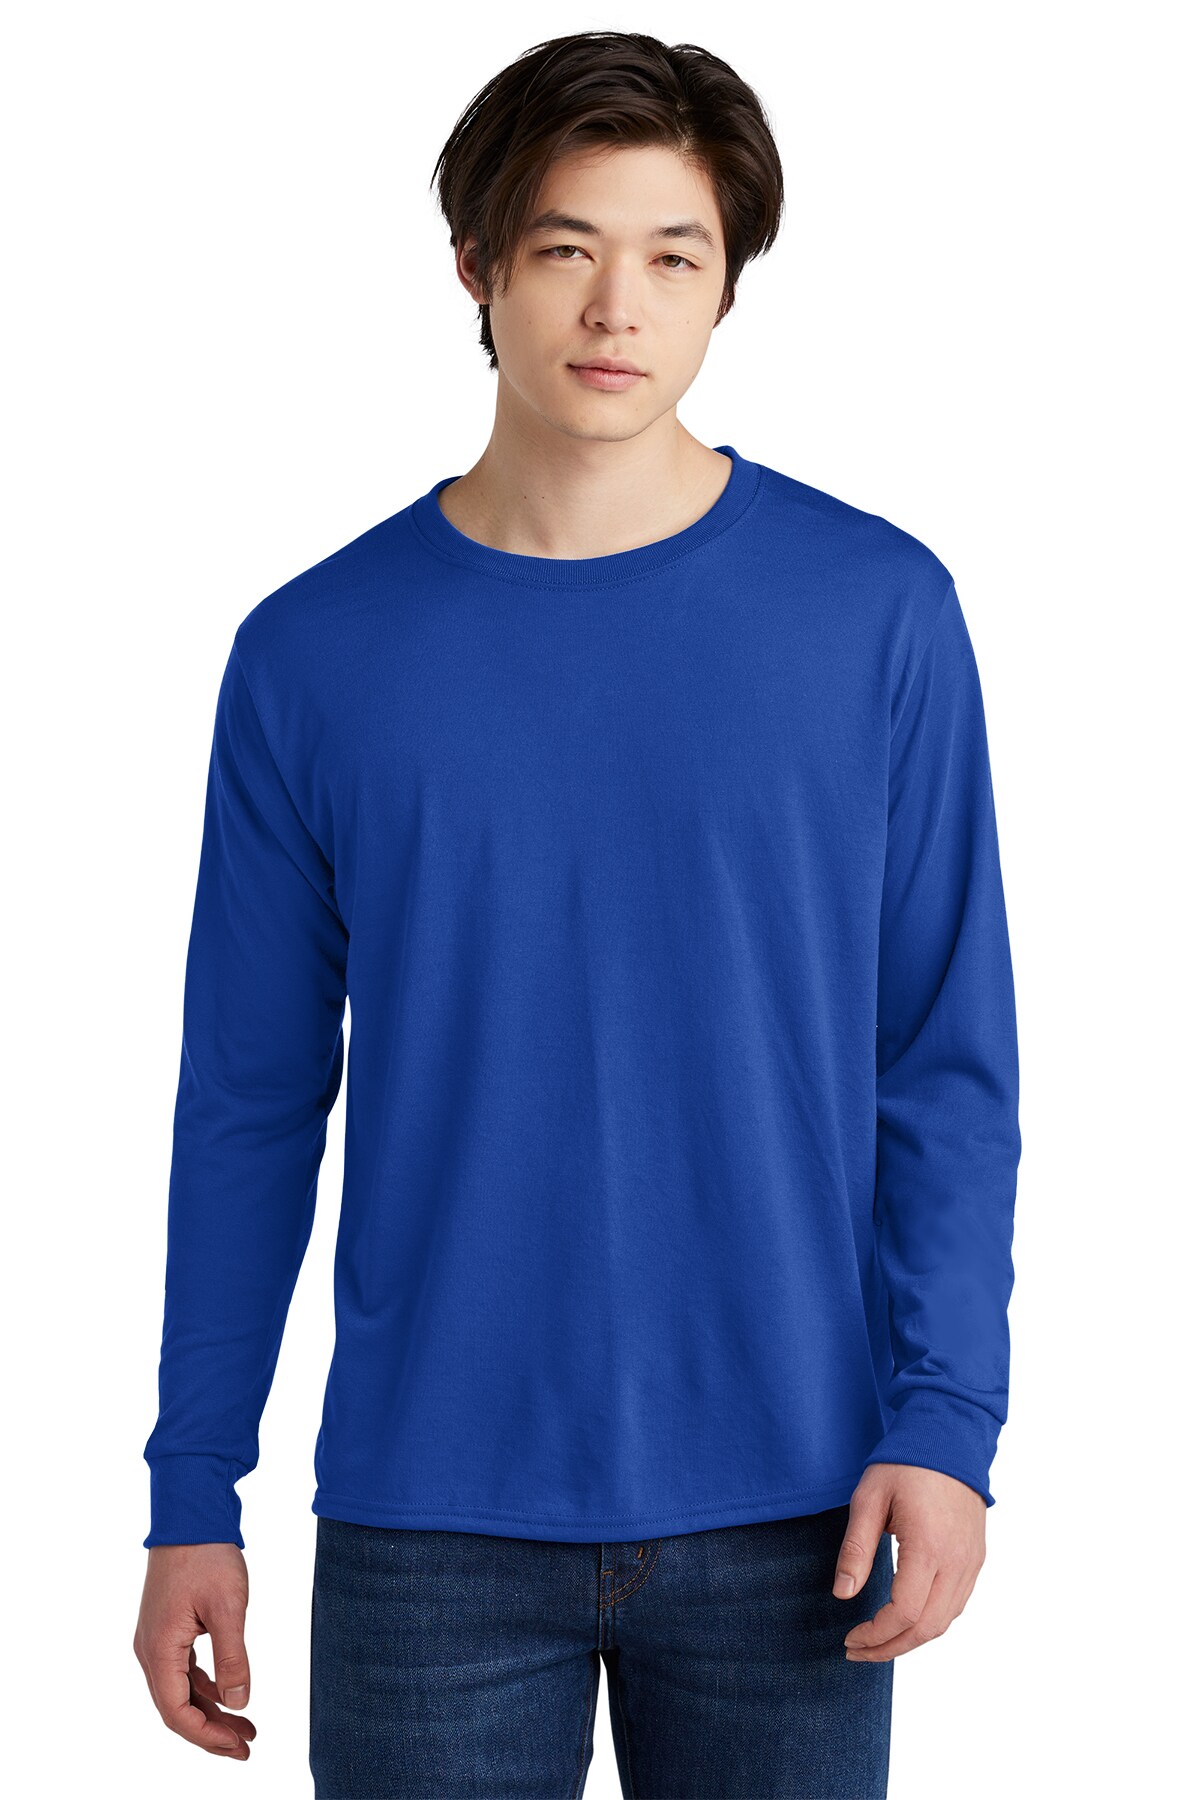 Why Long-Sleeve T-Shirts Are Essential for Your Wardrobe